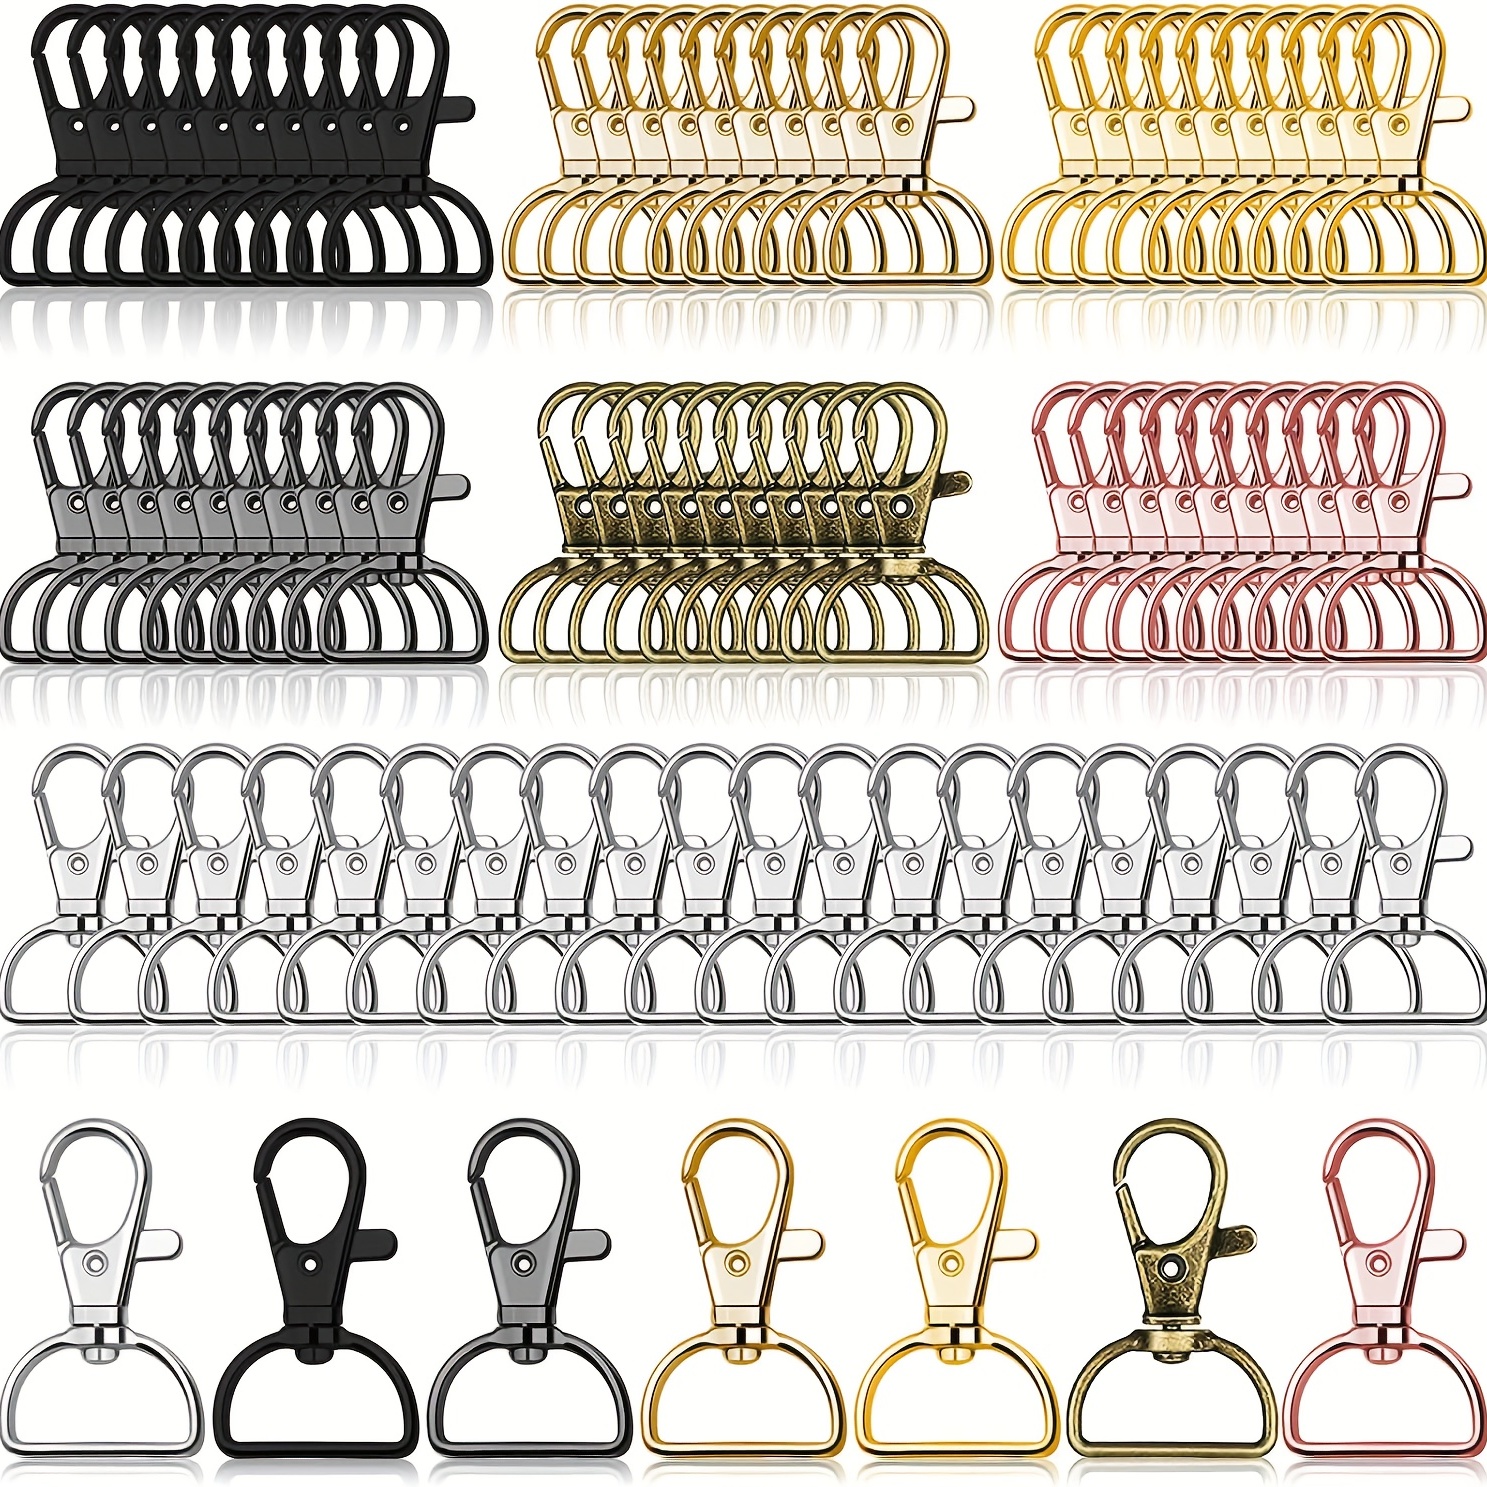 JEWEDECO 20pcs Back Clip Metal Accessories Metal Key Fob Clamps Keychain  Hardware Pliers Keychain Fob Hardware Key Ring Hardware Key Accessories Key